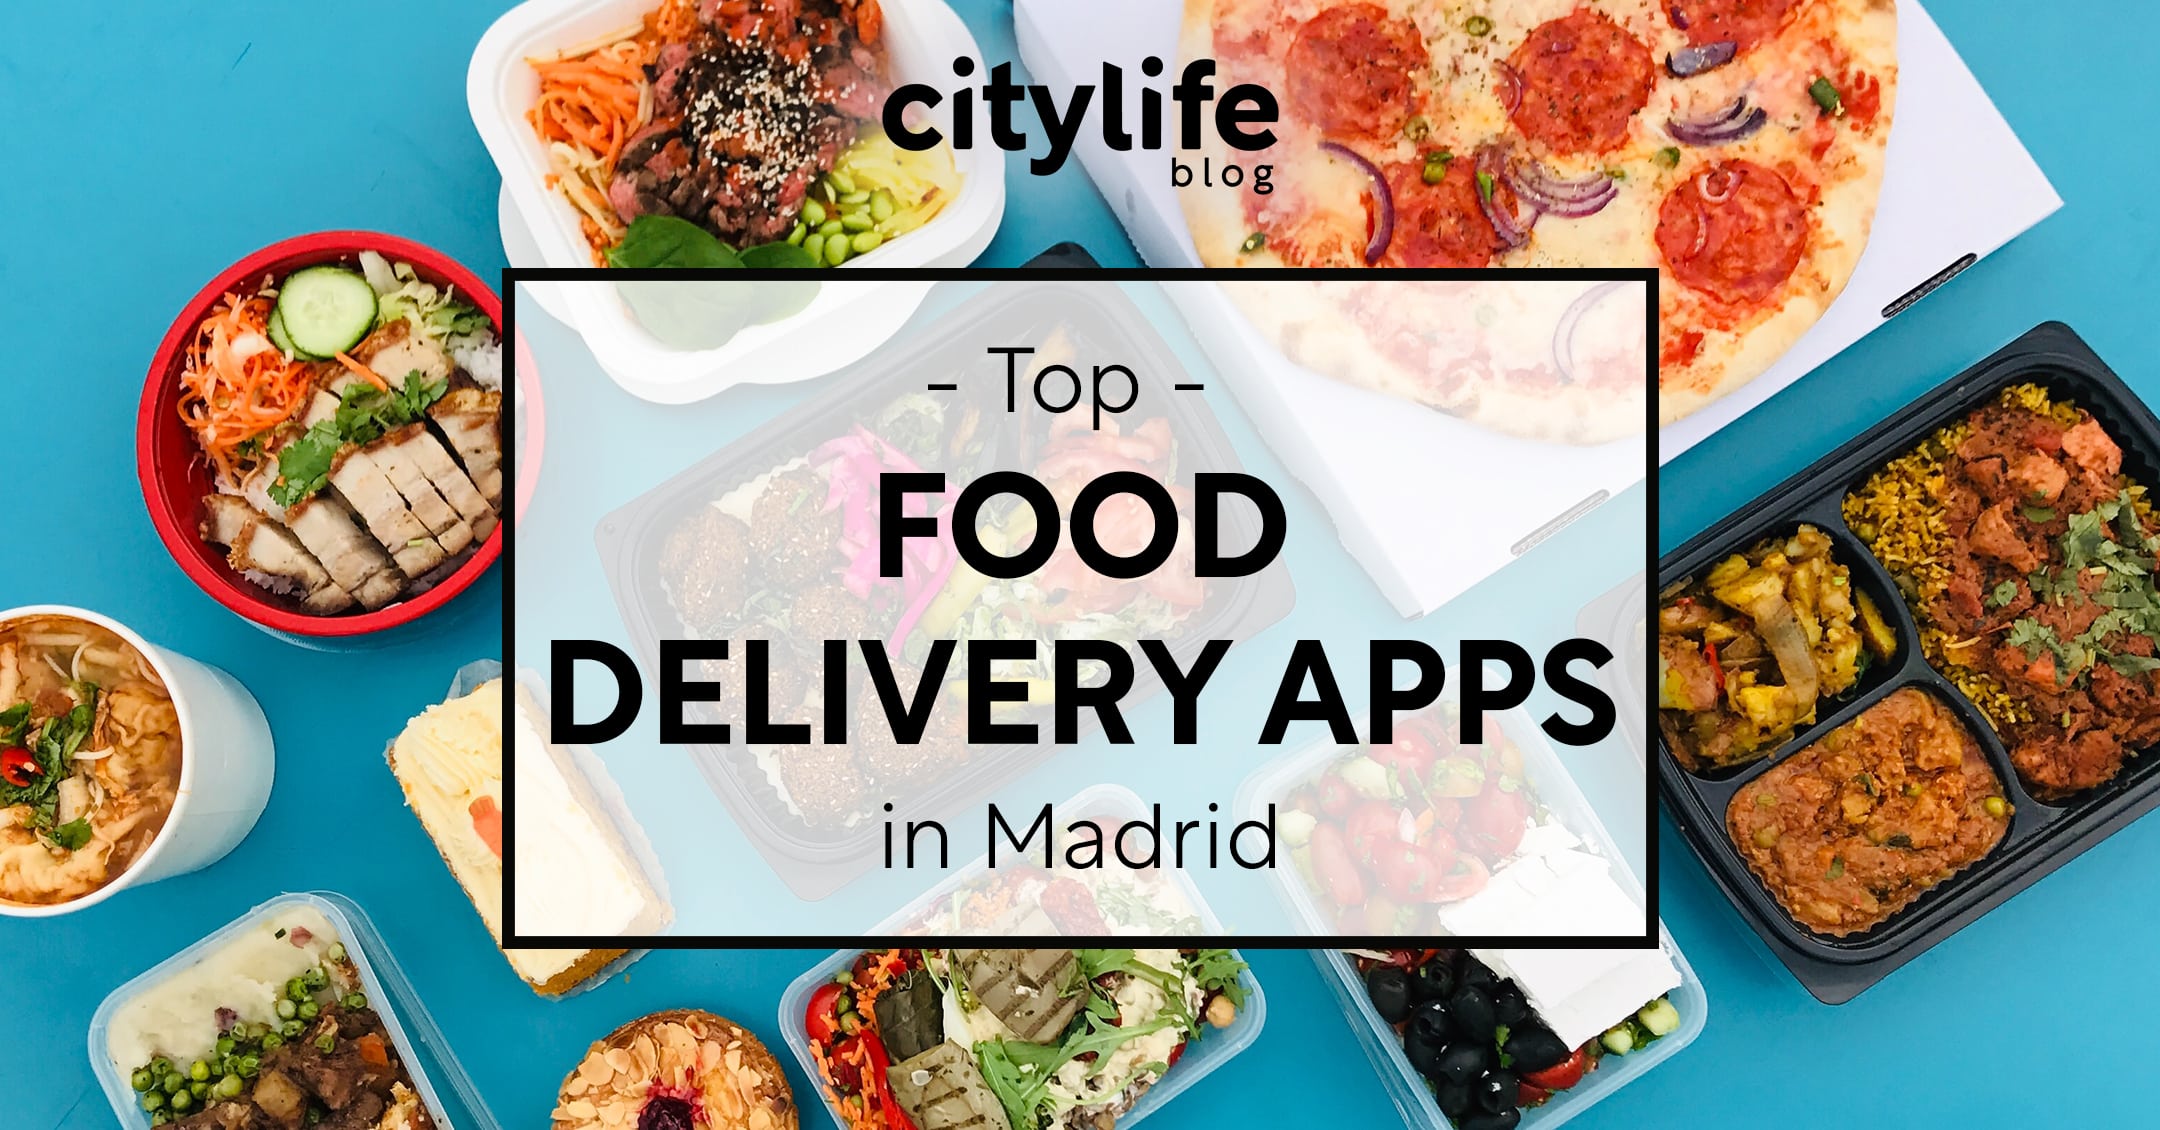 featured-image-food-delivery-apps-discounts-citylife-madrid